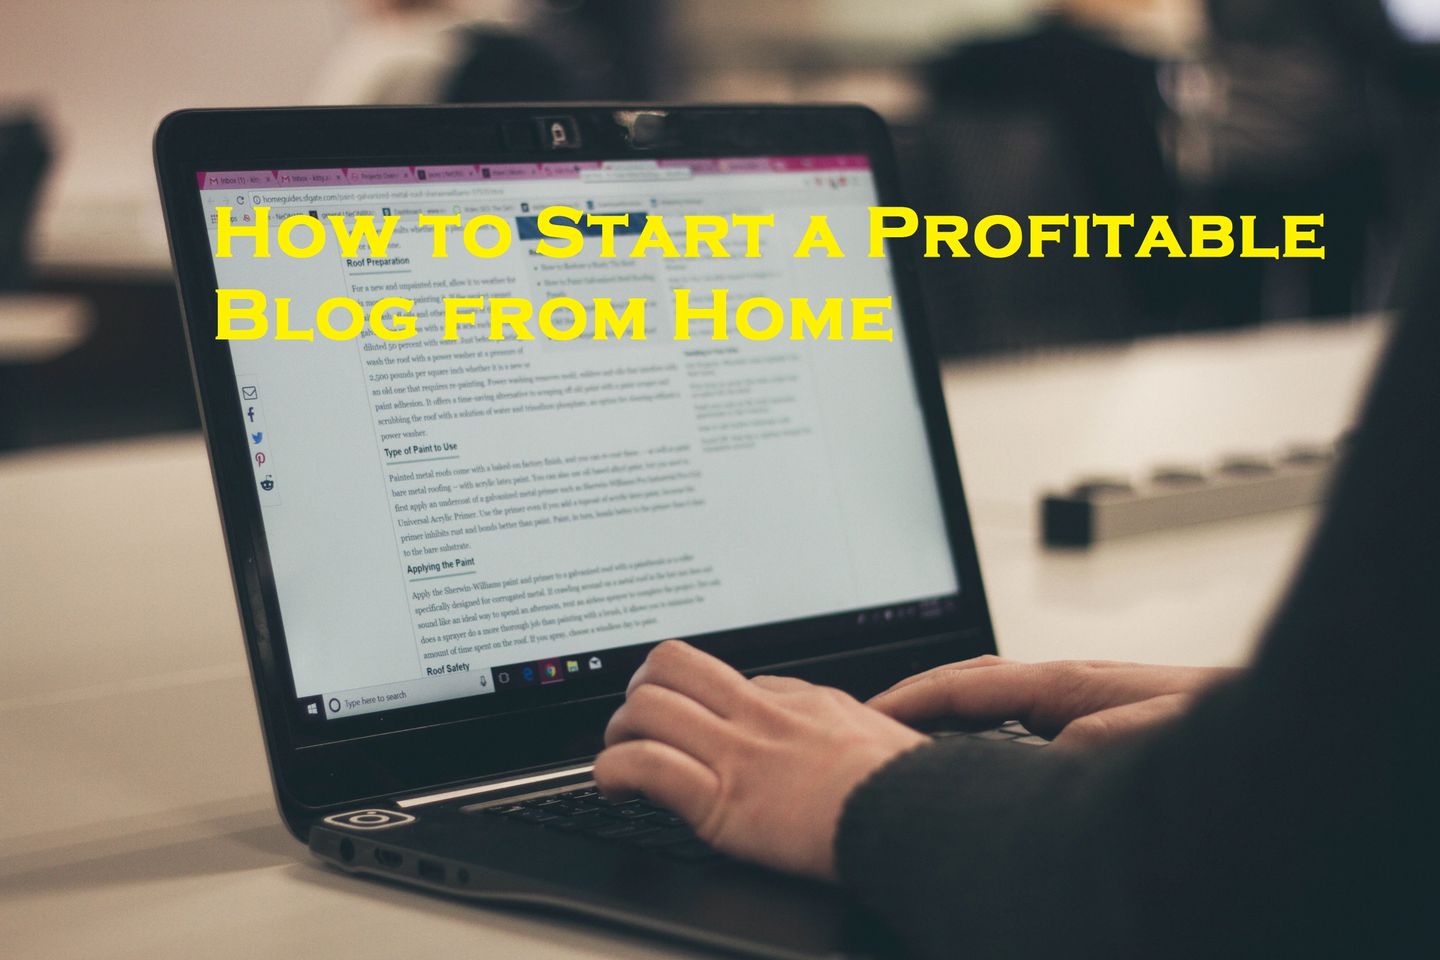 How to Start a Profitable Blog from Home: A Step-by-Step Guide